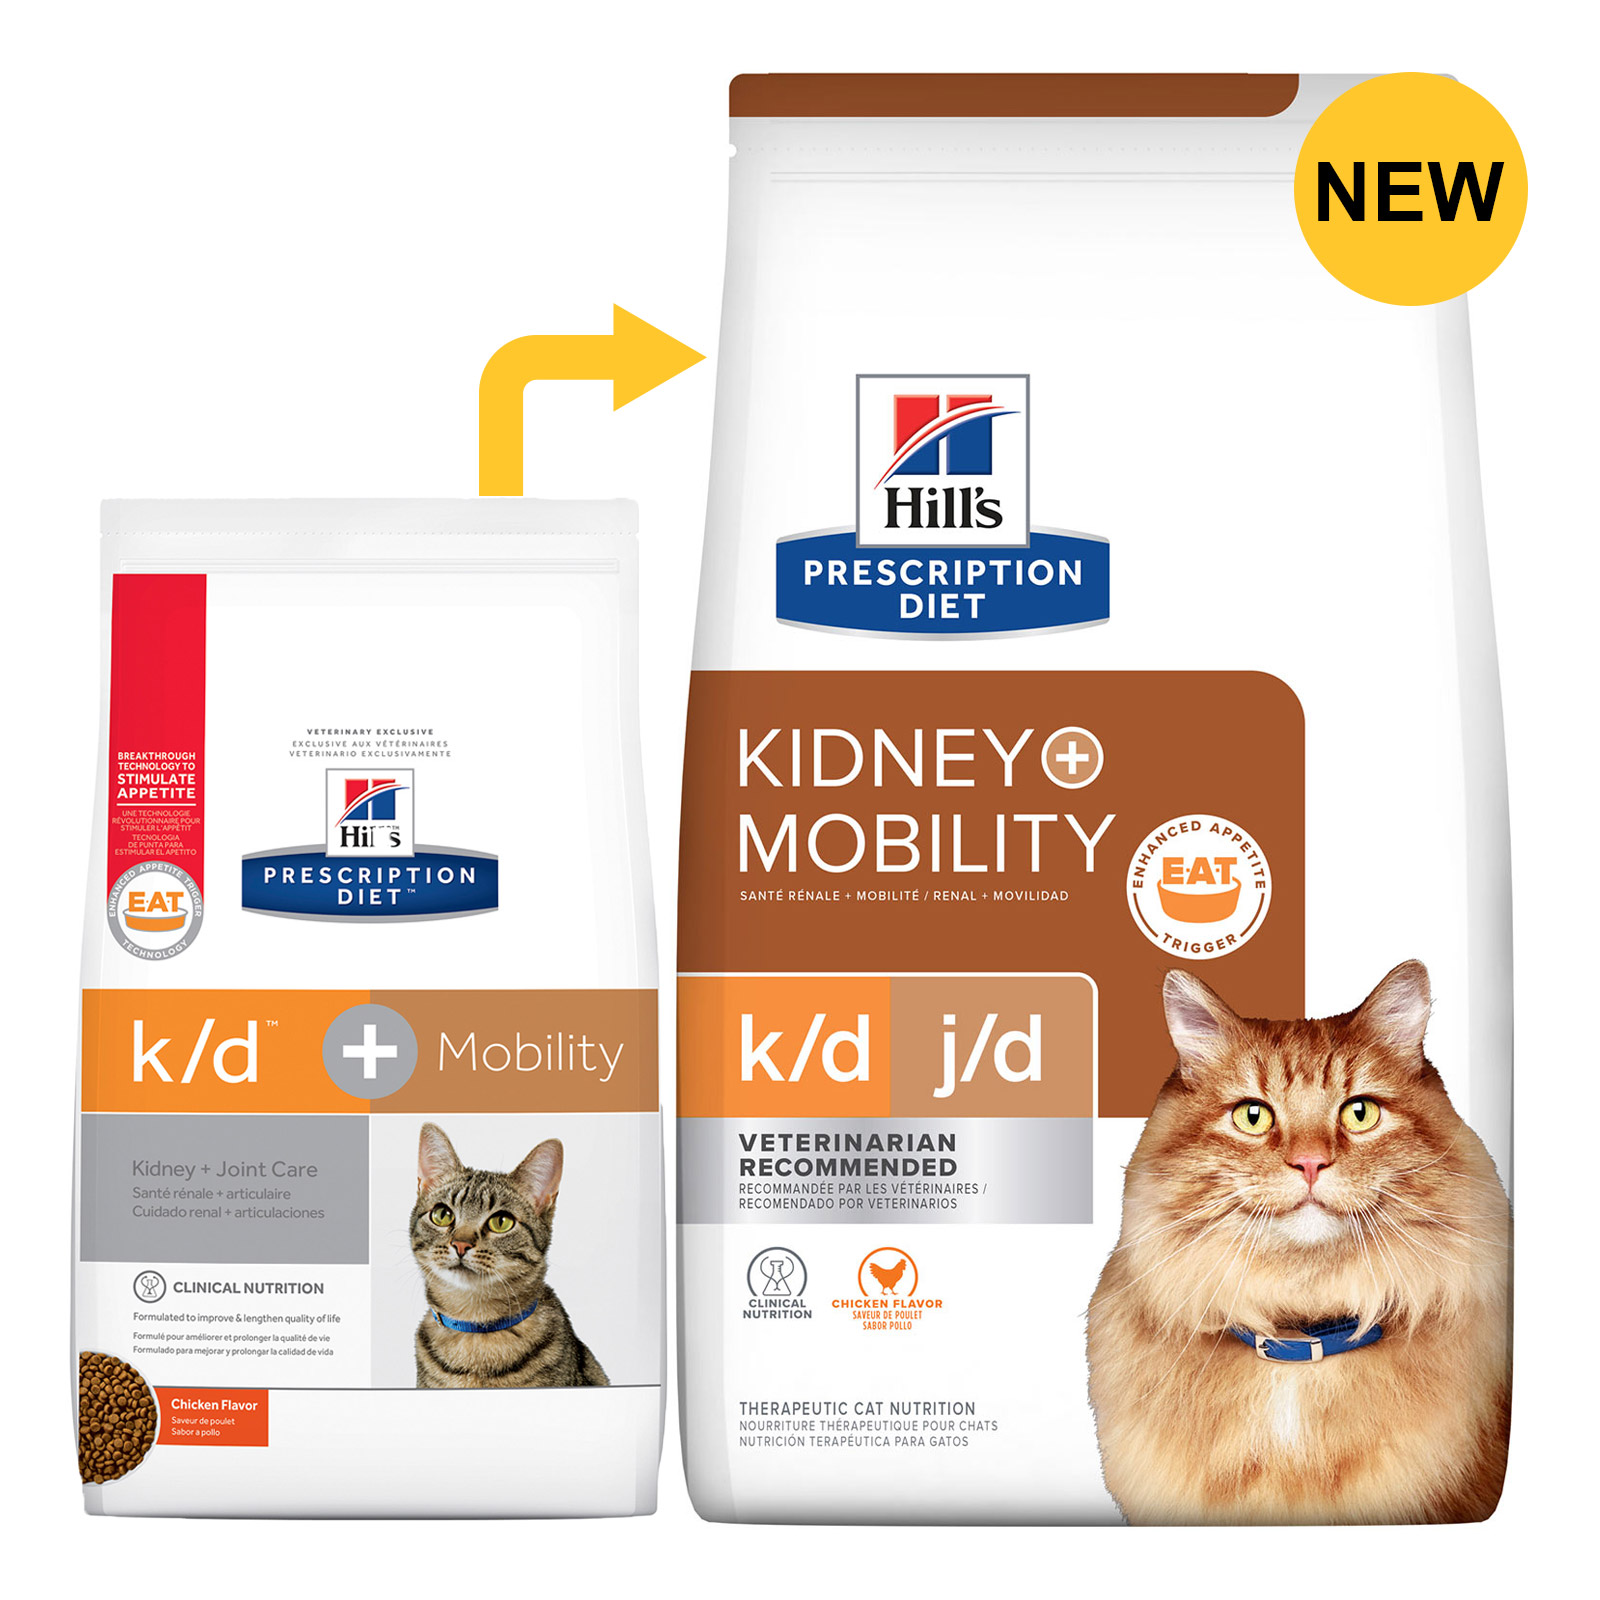 Hill's Prescription Diet k/d + Mobility Chicken Dry Cat Food for Food